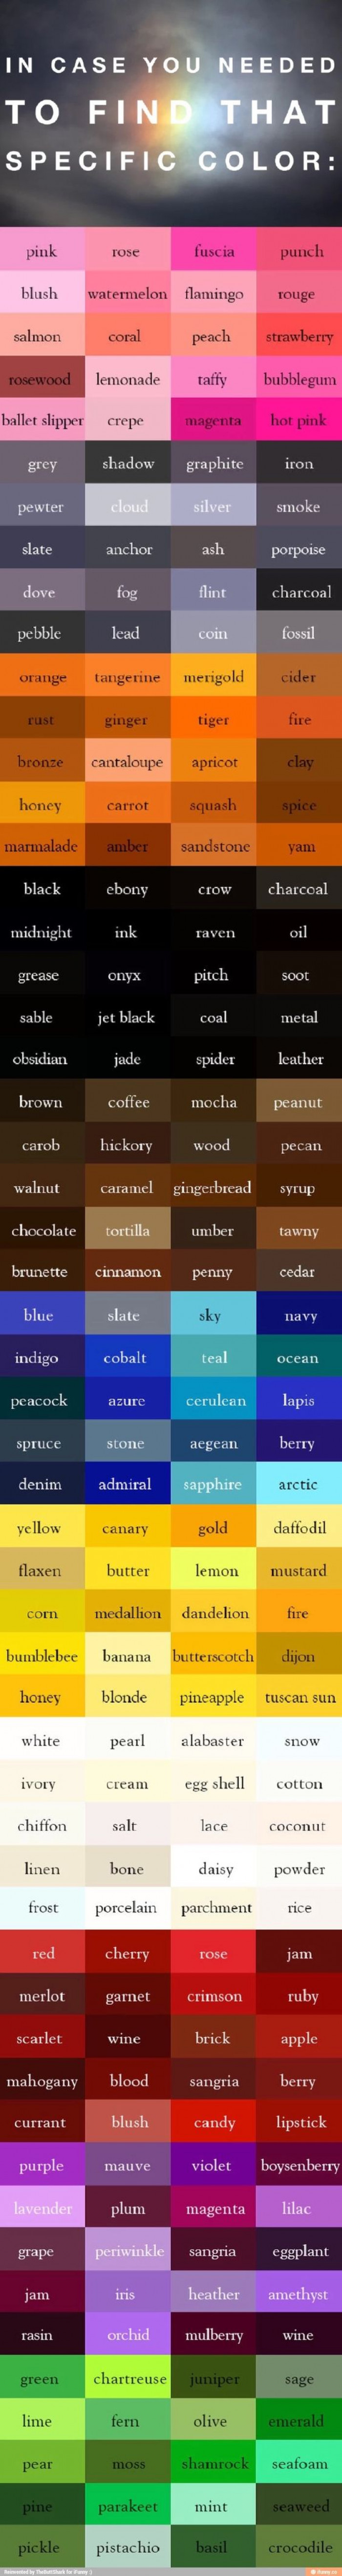 Very Useful Chart Incase You Need To Find A Specific Color